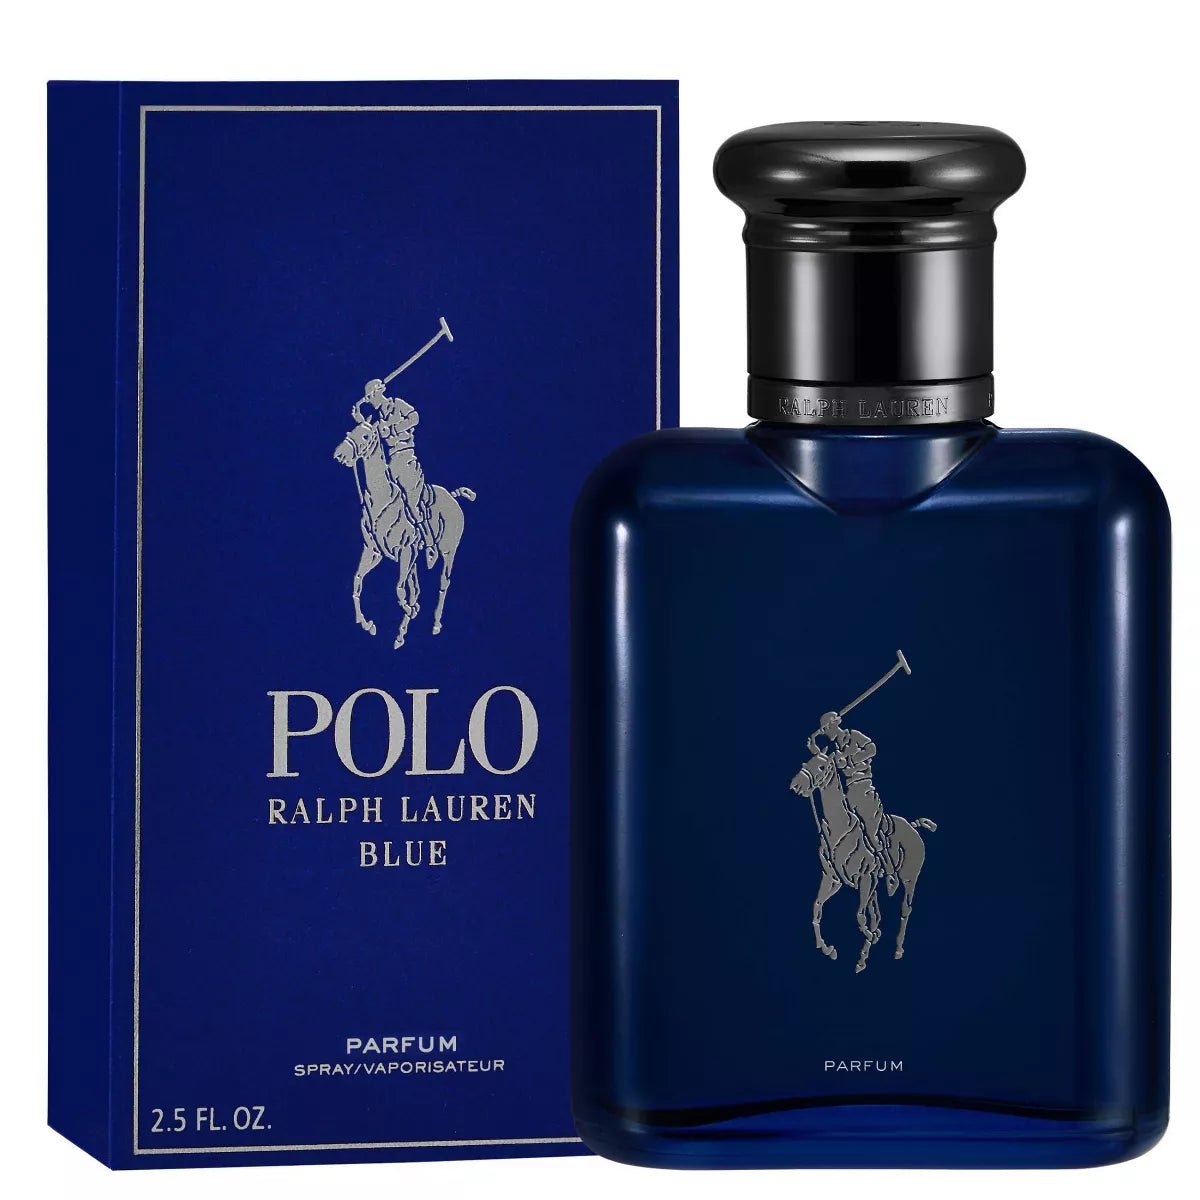 Polo Blue Parfum Spray for Men by Ralph Lauren, Product image 1